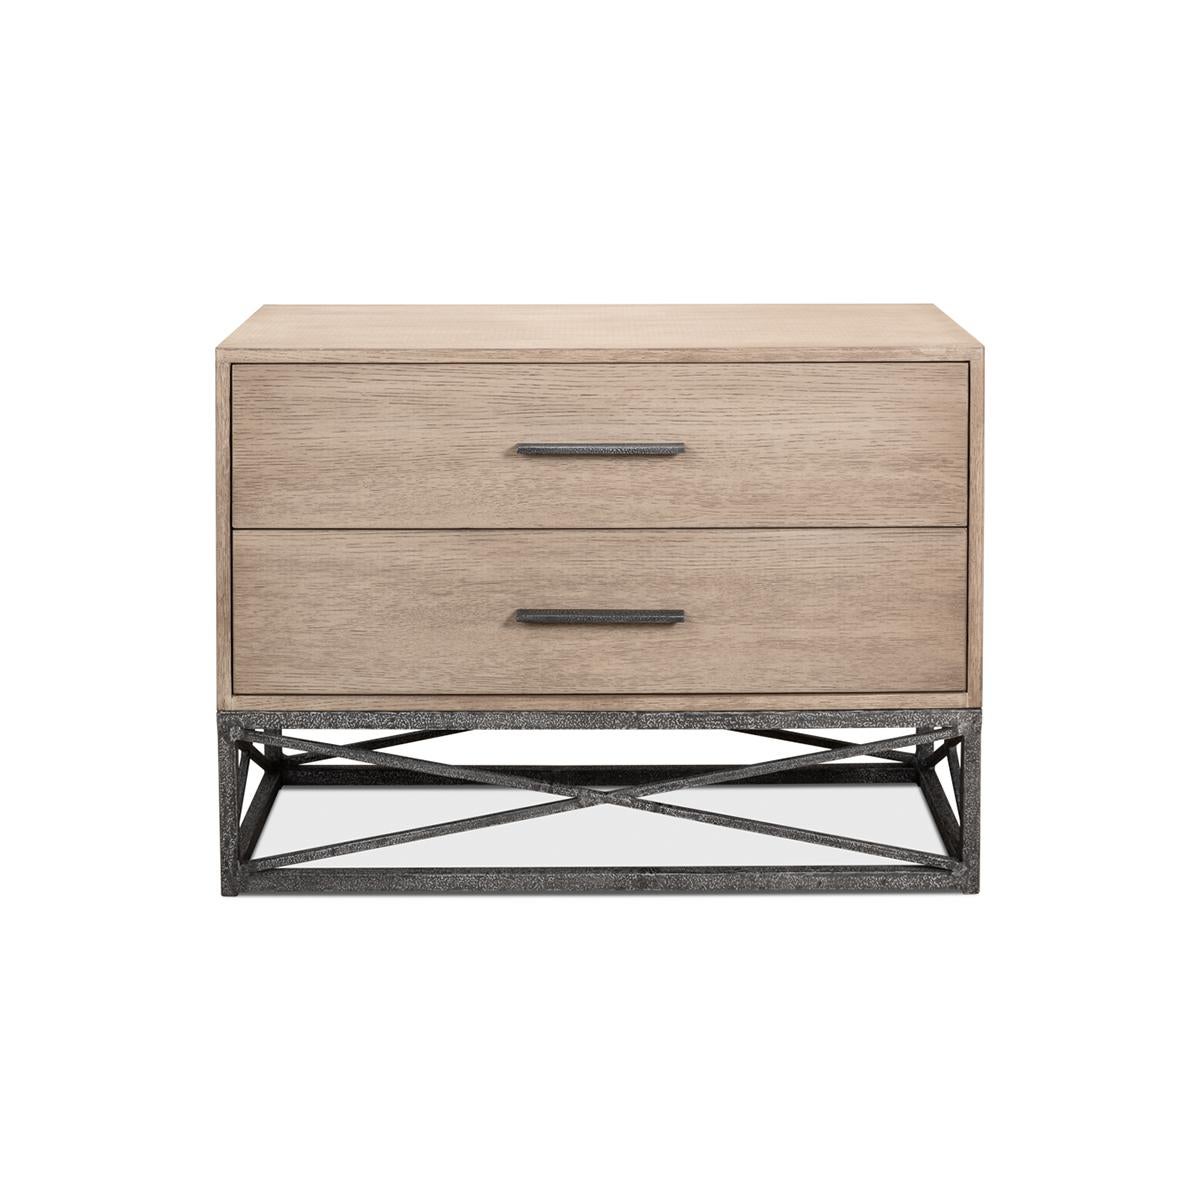 A two-drawer chest with mixed materials and inspired by modern-day architecture. Pine veneered case with hand-forged iron openwork base.

Dimensions: 44